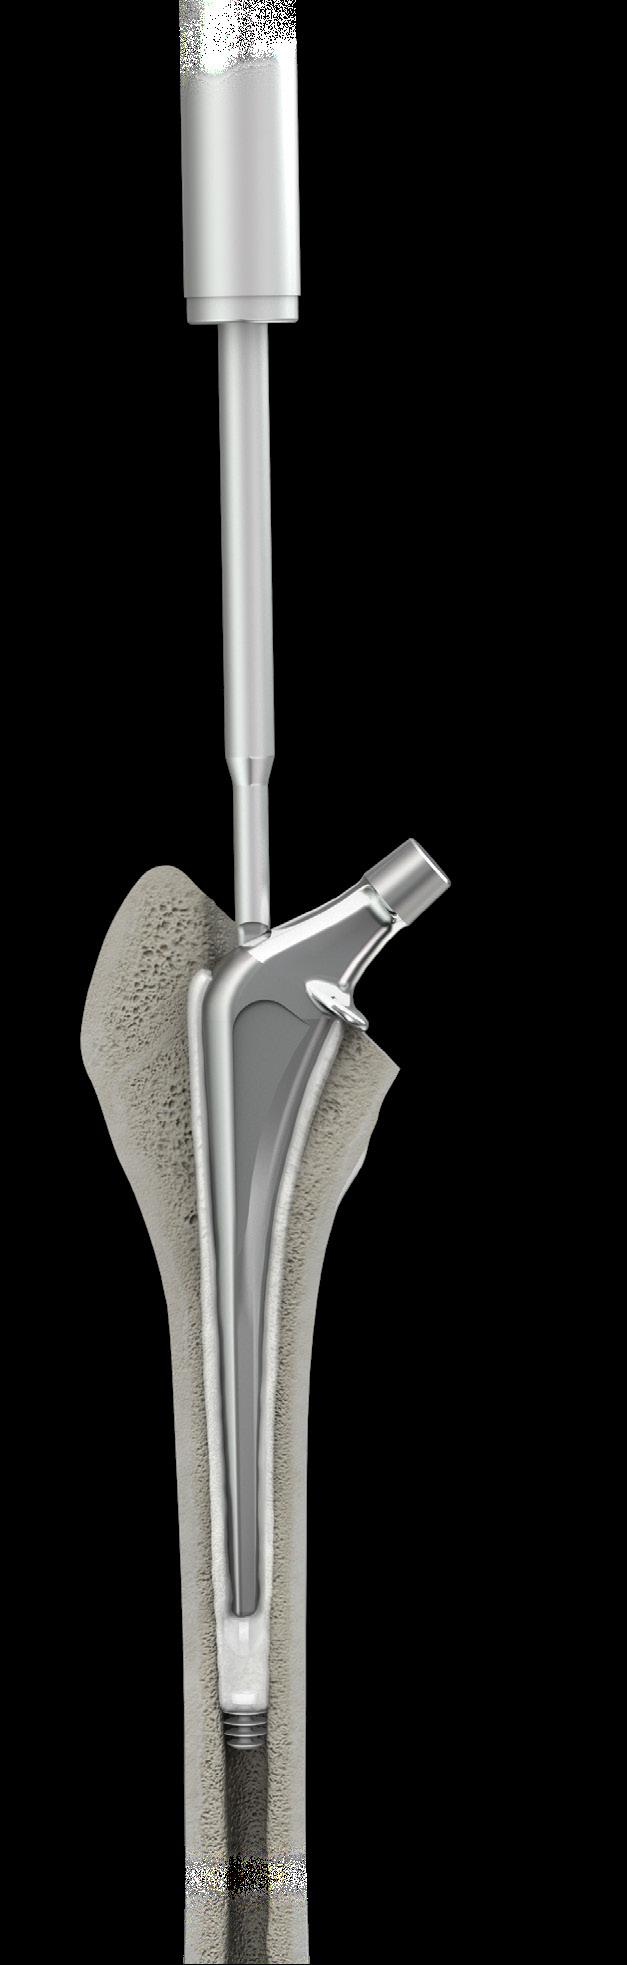 Use the Stem Inserter to slowly advance the Implant into the cement column, while keeping the proximal femoral opening partially occluded with your thumb.